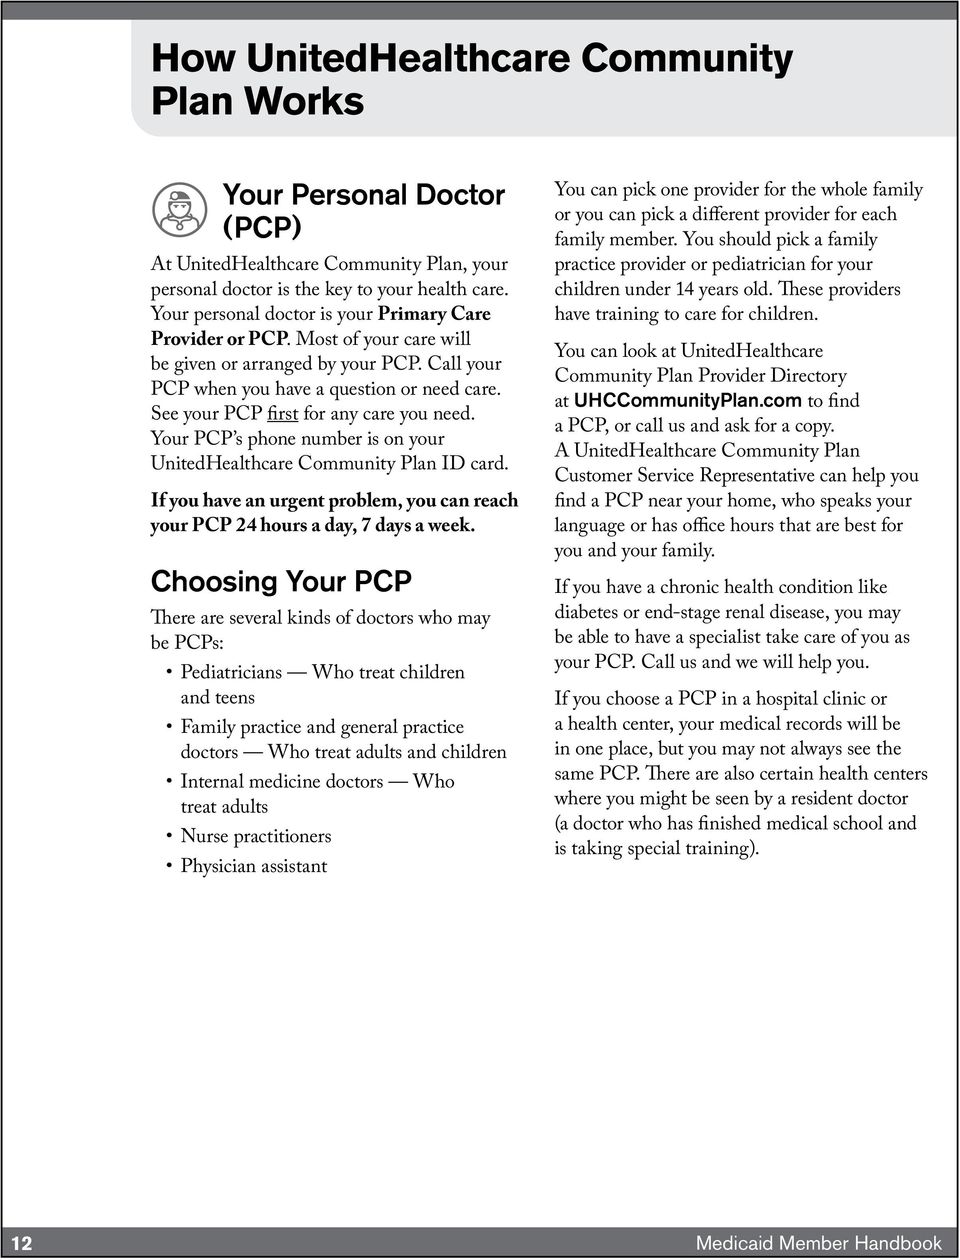 See your PCP first for any care you need. Your PCP s phone number is on your UnitedHealthcare Community Plan ID card.